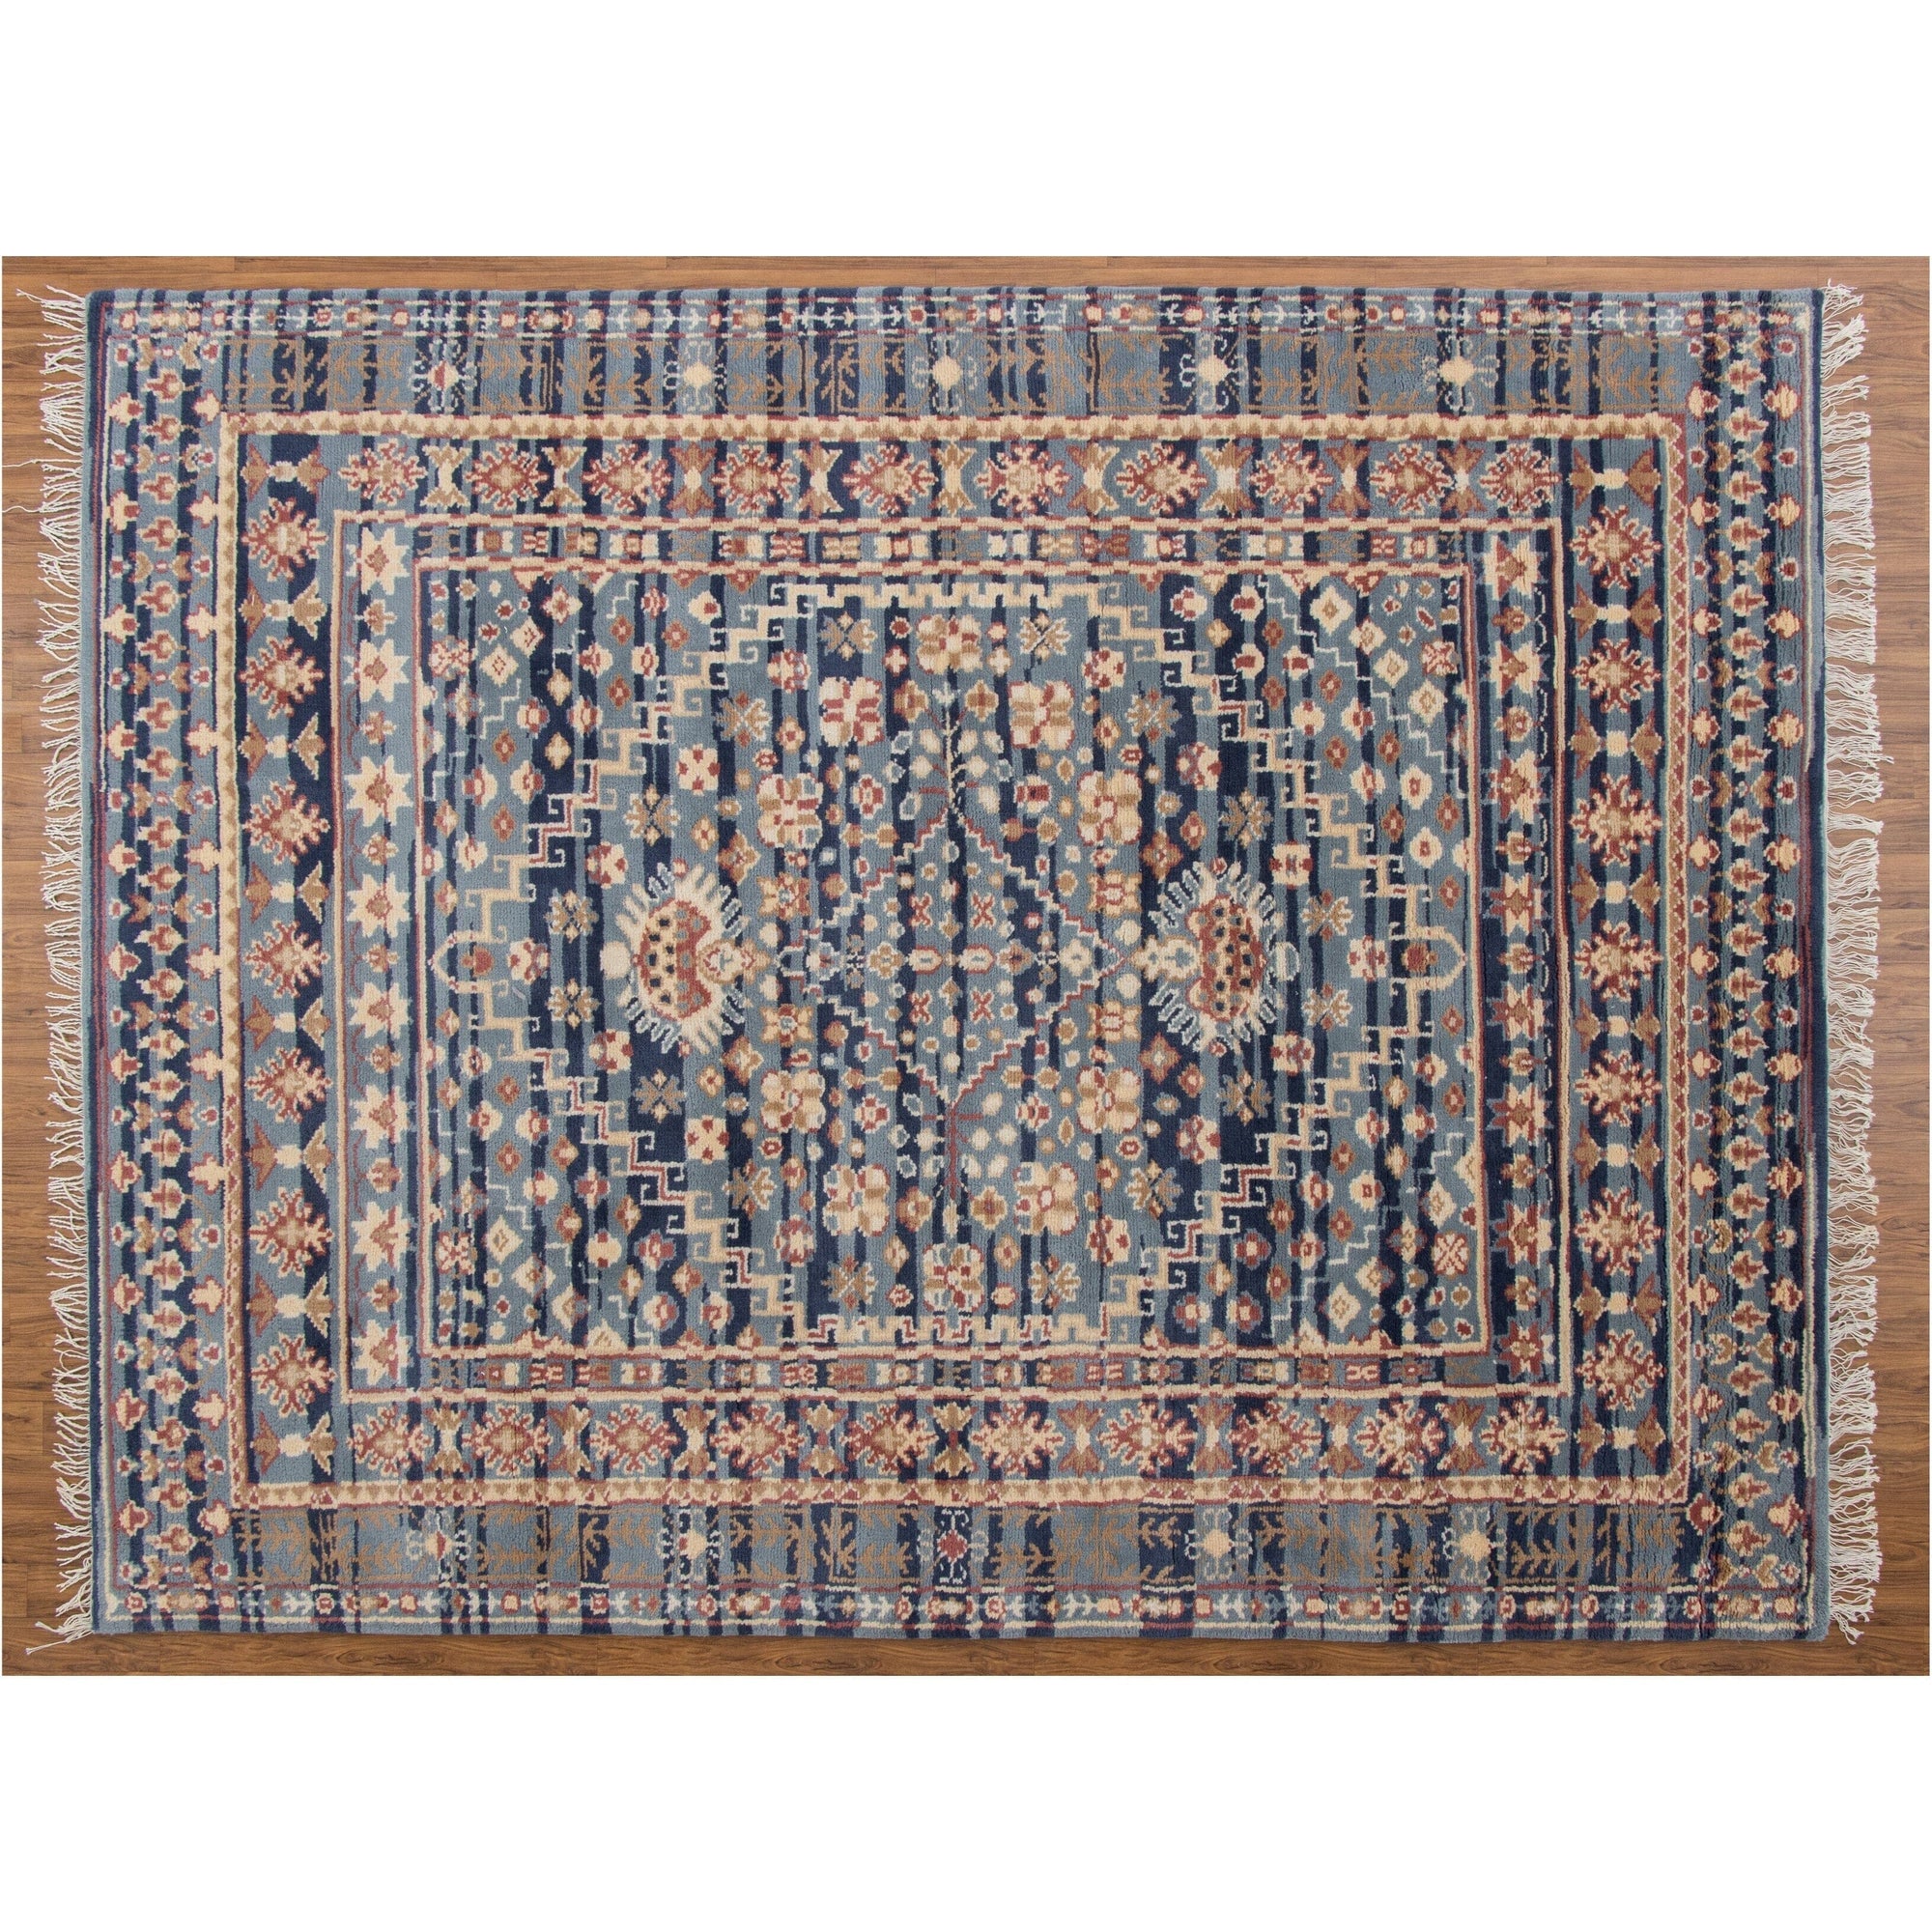 Gallerie Blue Handknotted Wool SAMPLE handknotted tibetan 60 knot Organic Weave Shop 2x2 